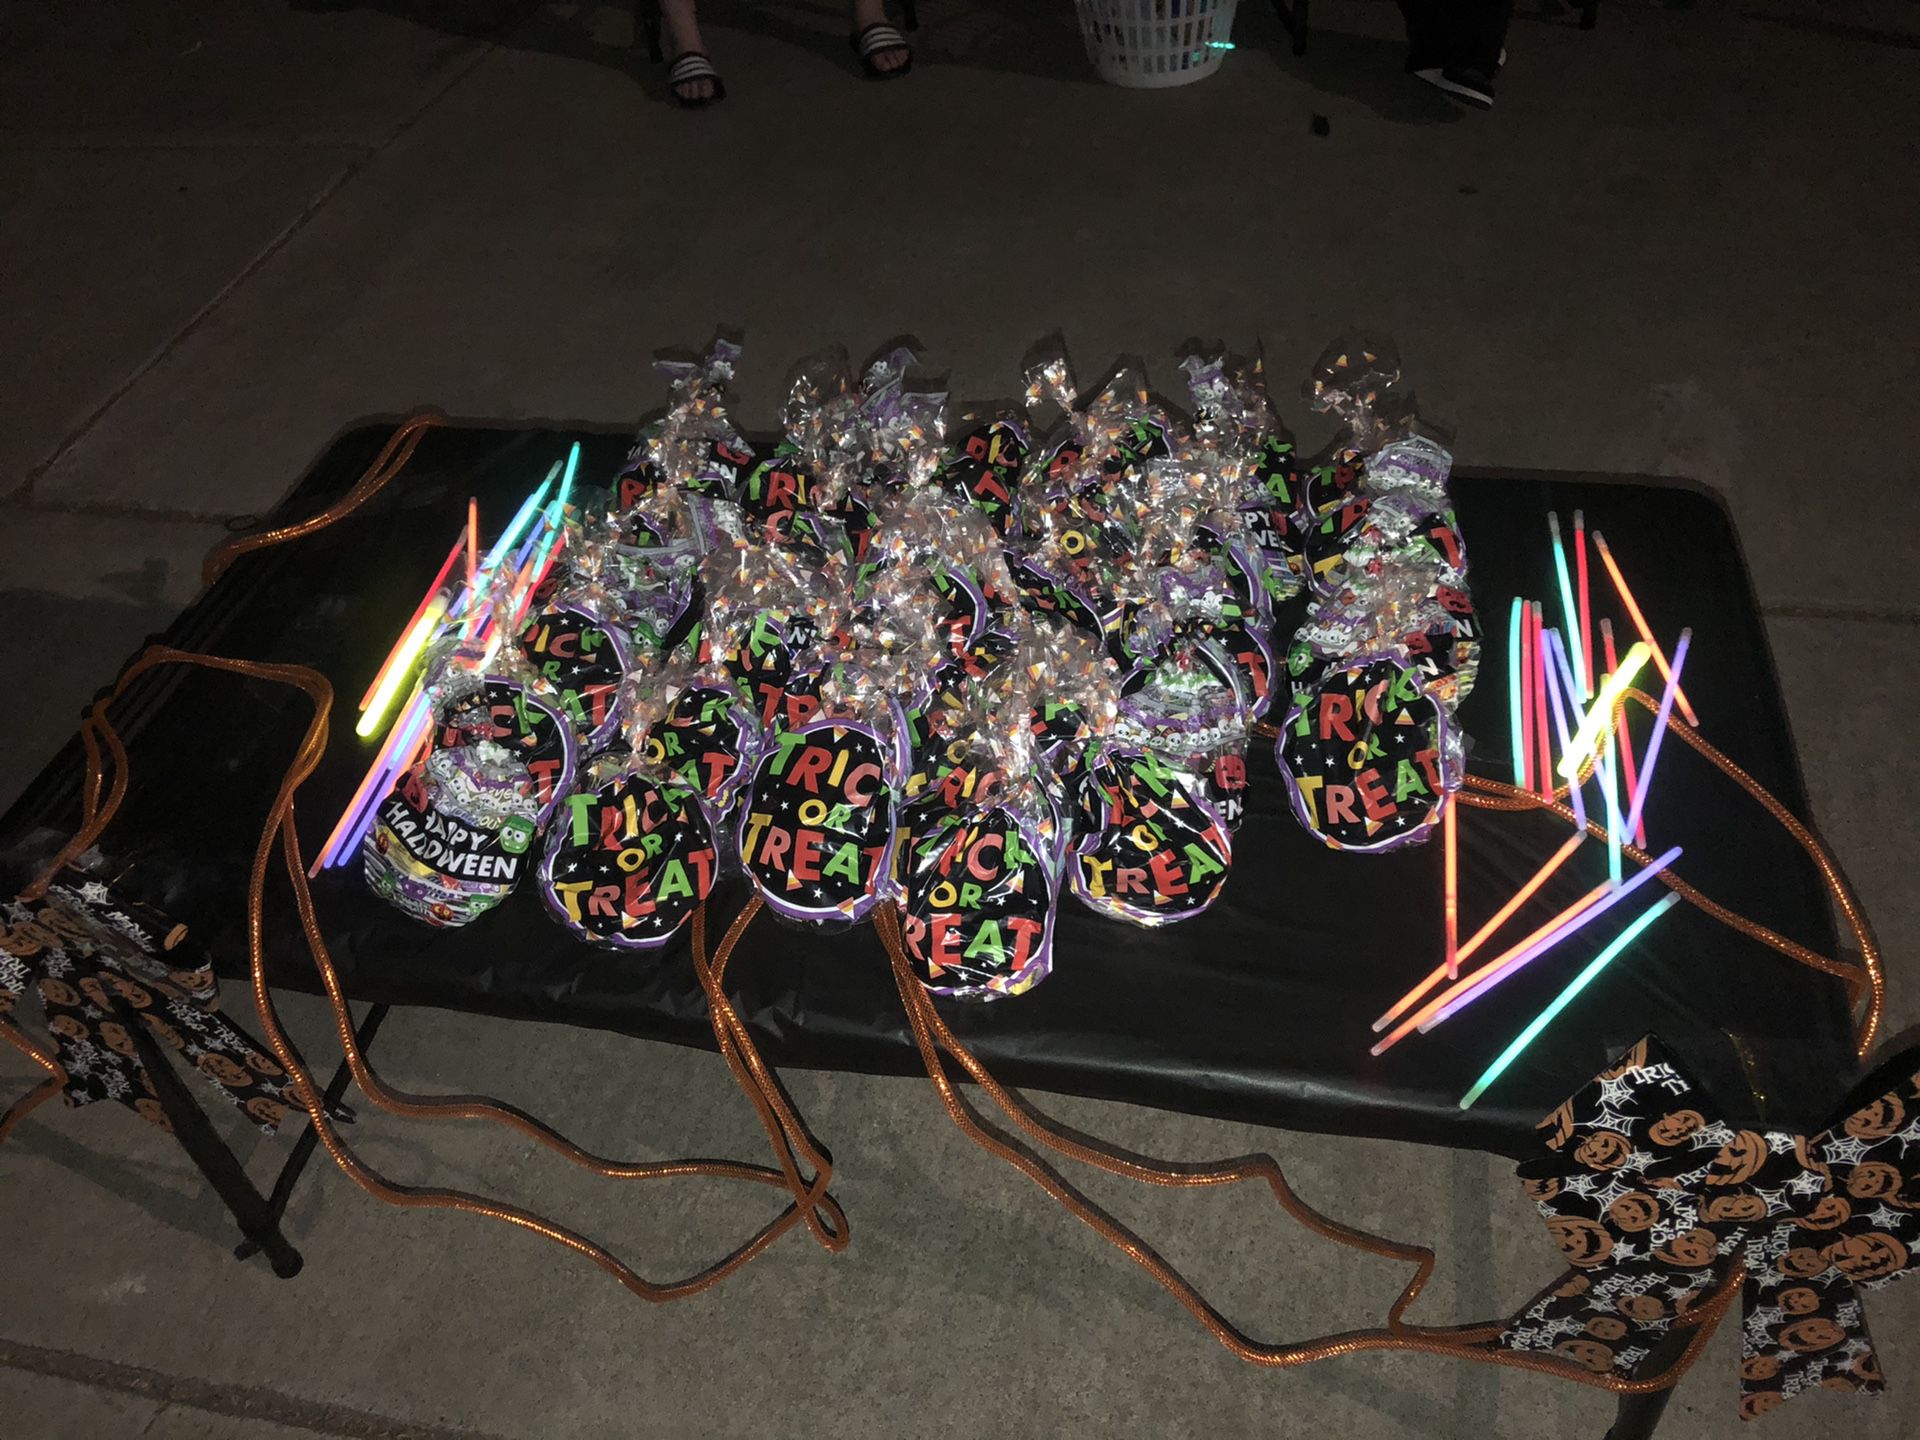 Free trick or treat bags and glow sticks